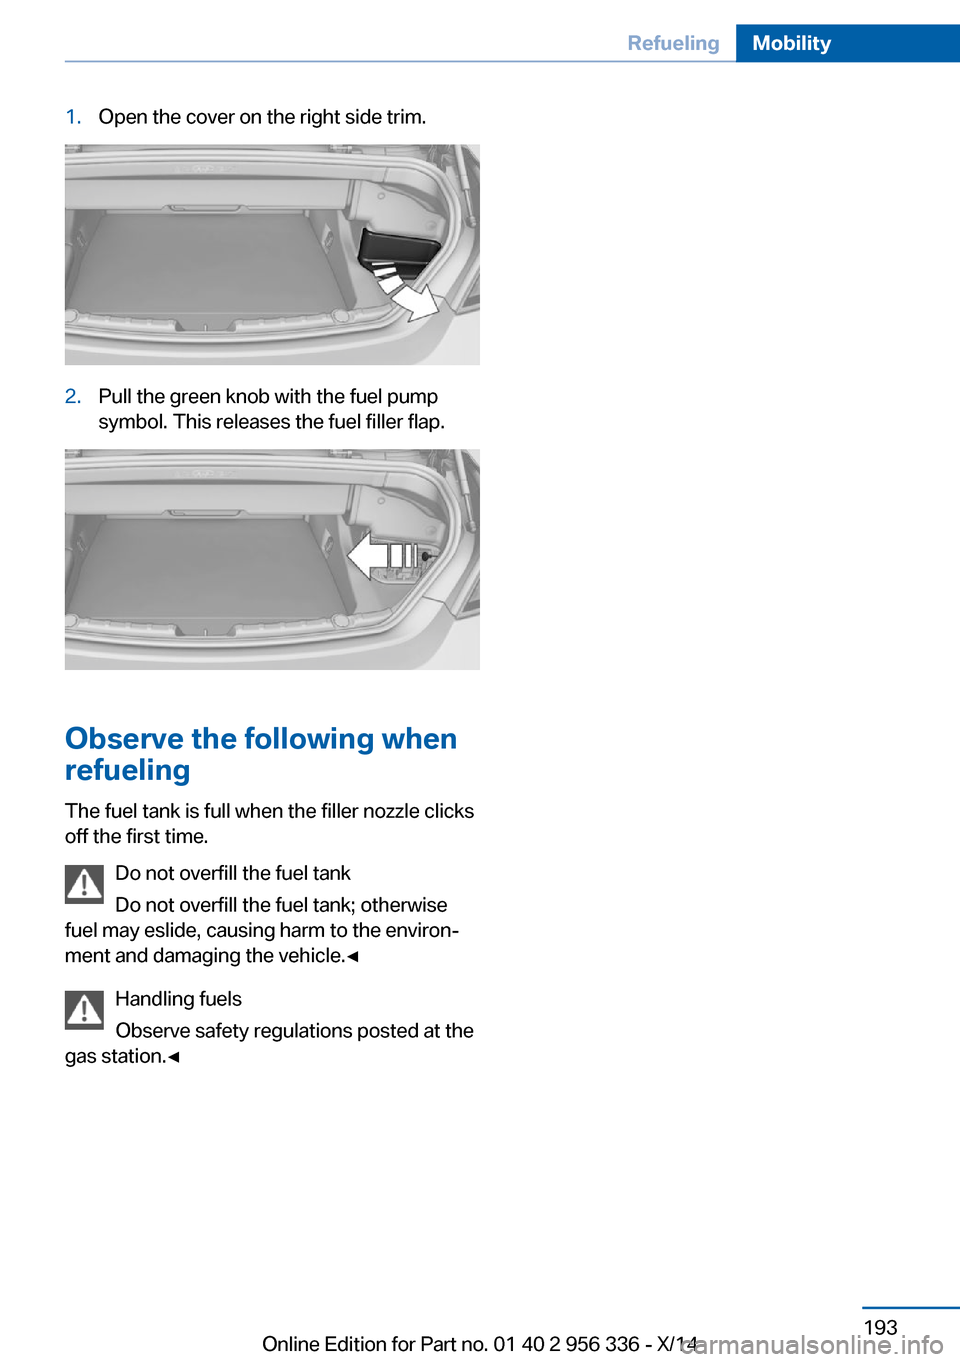 BMW 6 SERIES CONVERTIBLE 2014 F12 Owners Manual 1.Open the cover on the right side trim.2.Pull the green knob with the fuel pump
symbol. This releases the fuel filler flap.
Observe the following when
refueling
The fuel tank is full when the filler 